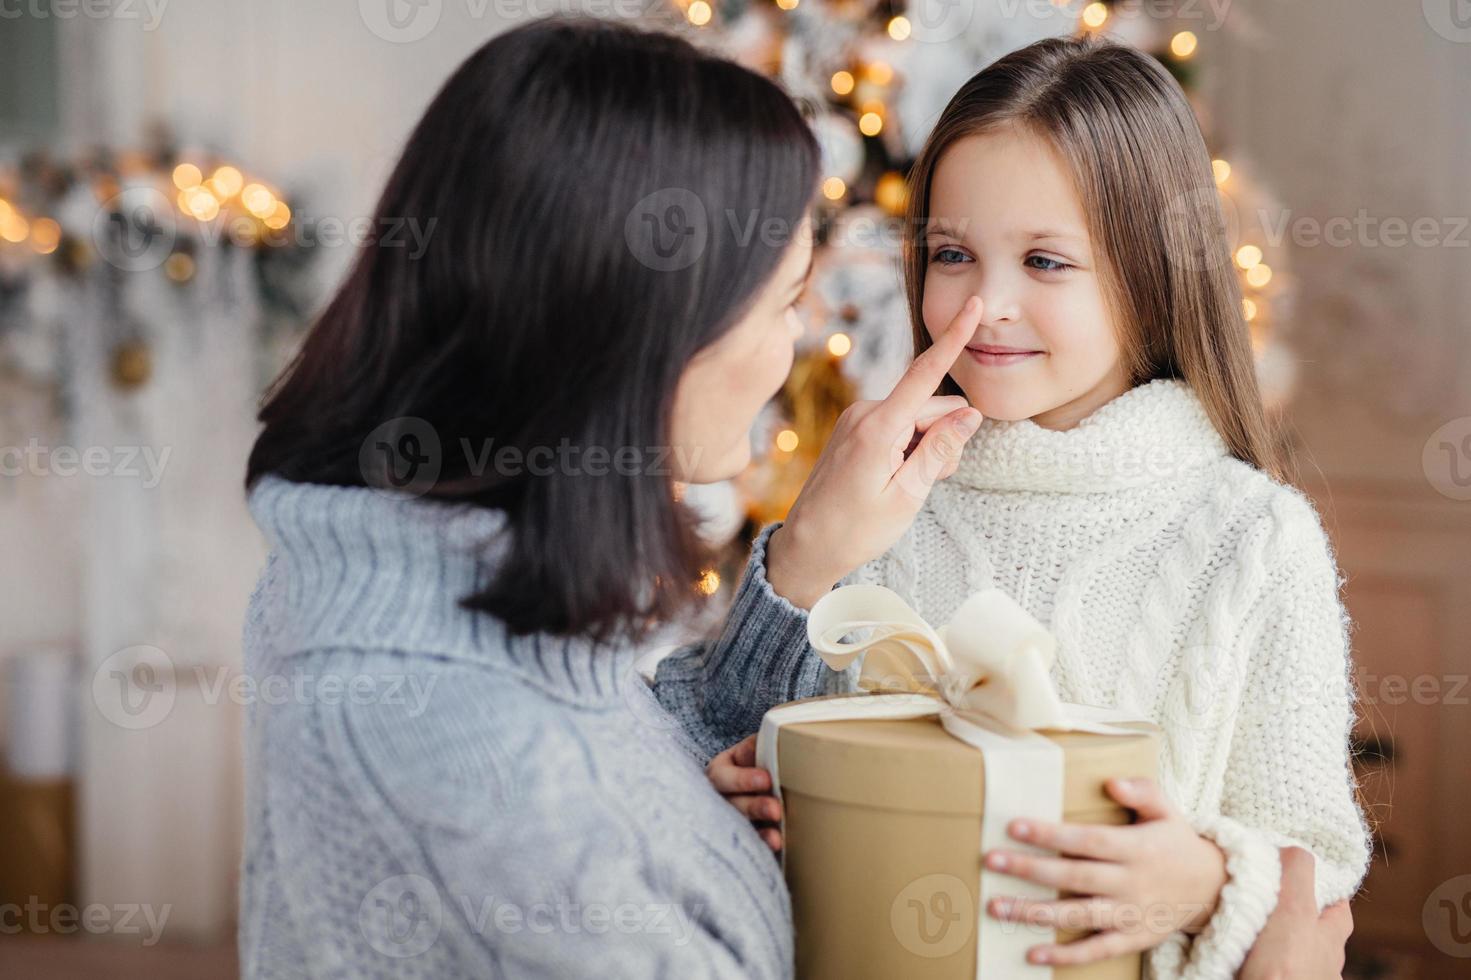 Affectionate mother gives present to her adorble little daughter, prepares surprise on Christmas, touch her nose, expresses great love. Family, celebration, presents, miracle, winter holidays concept photo